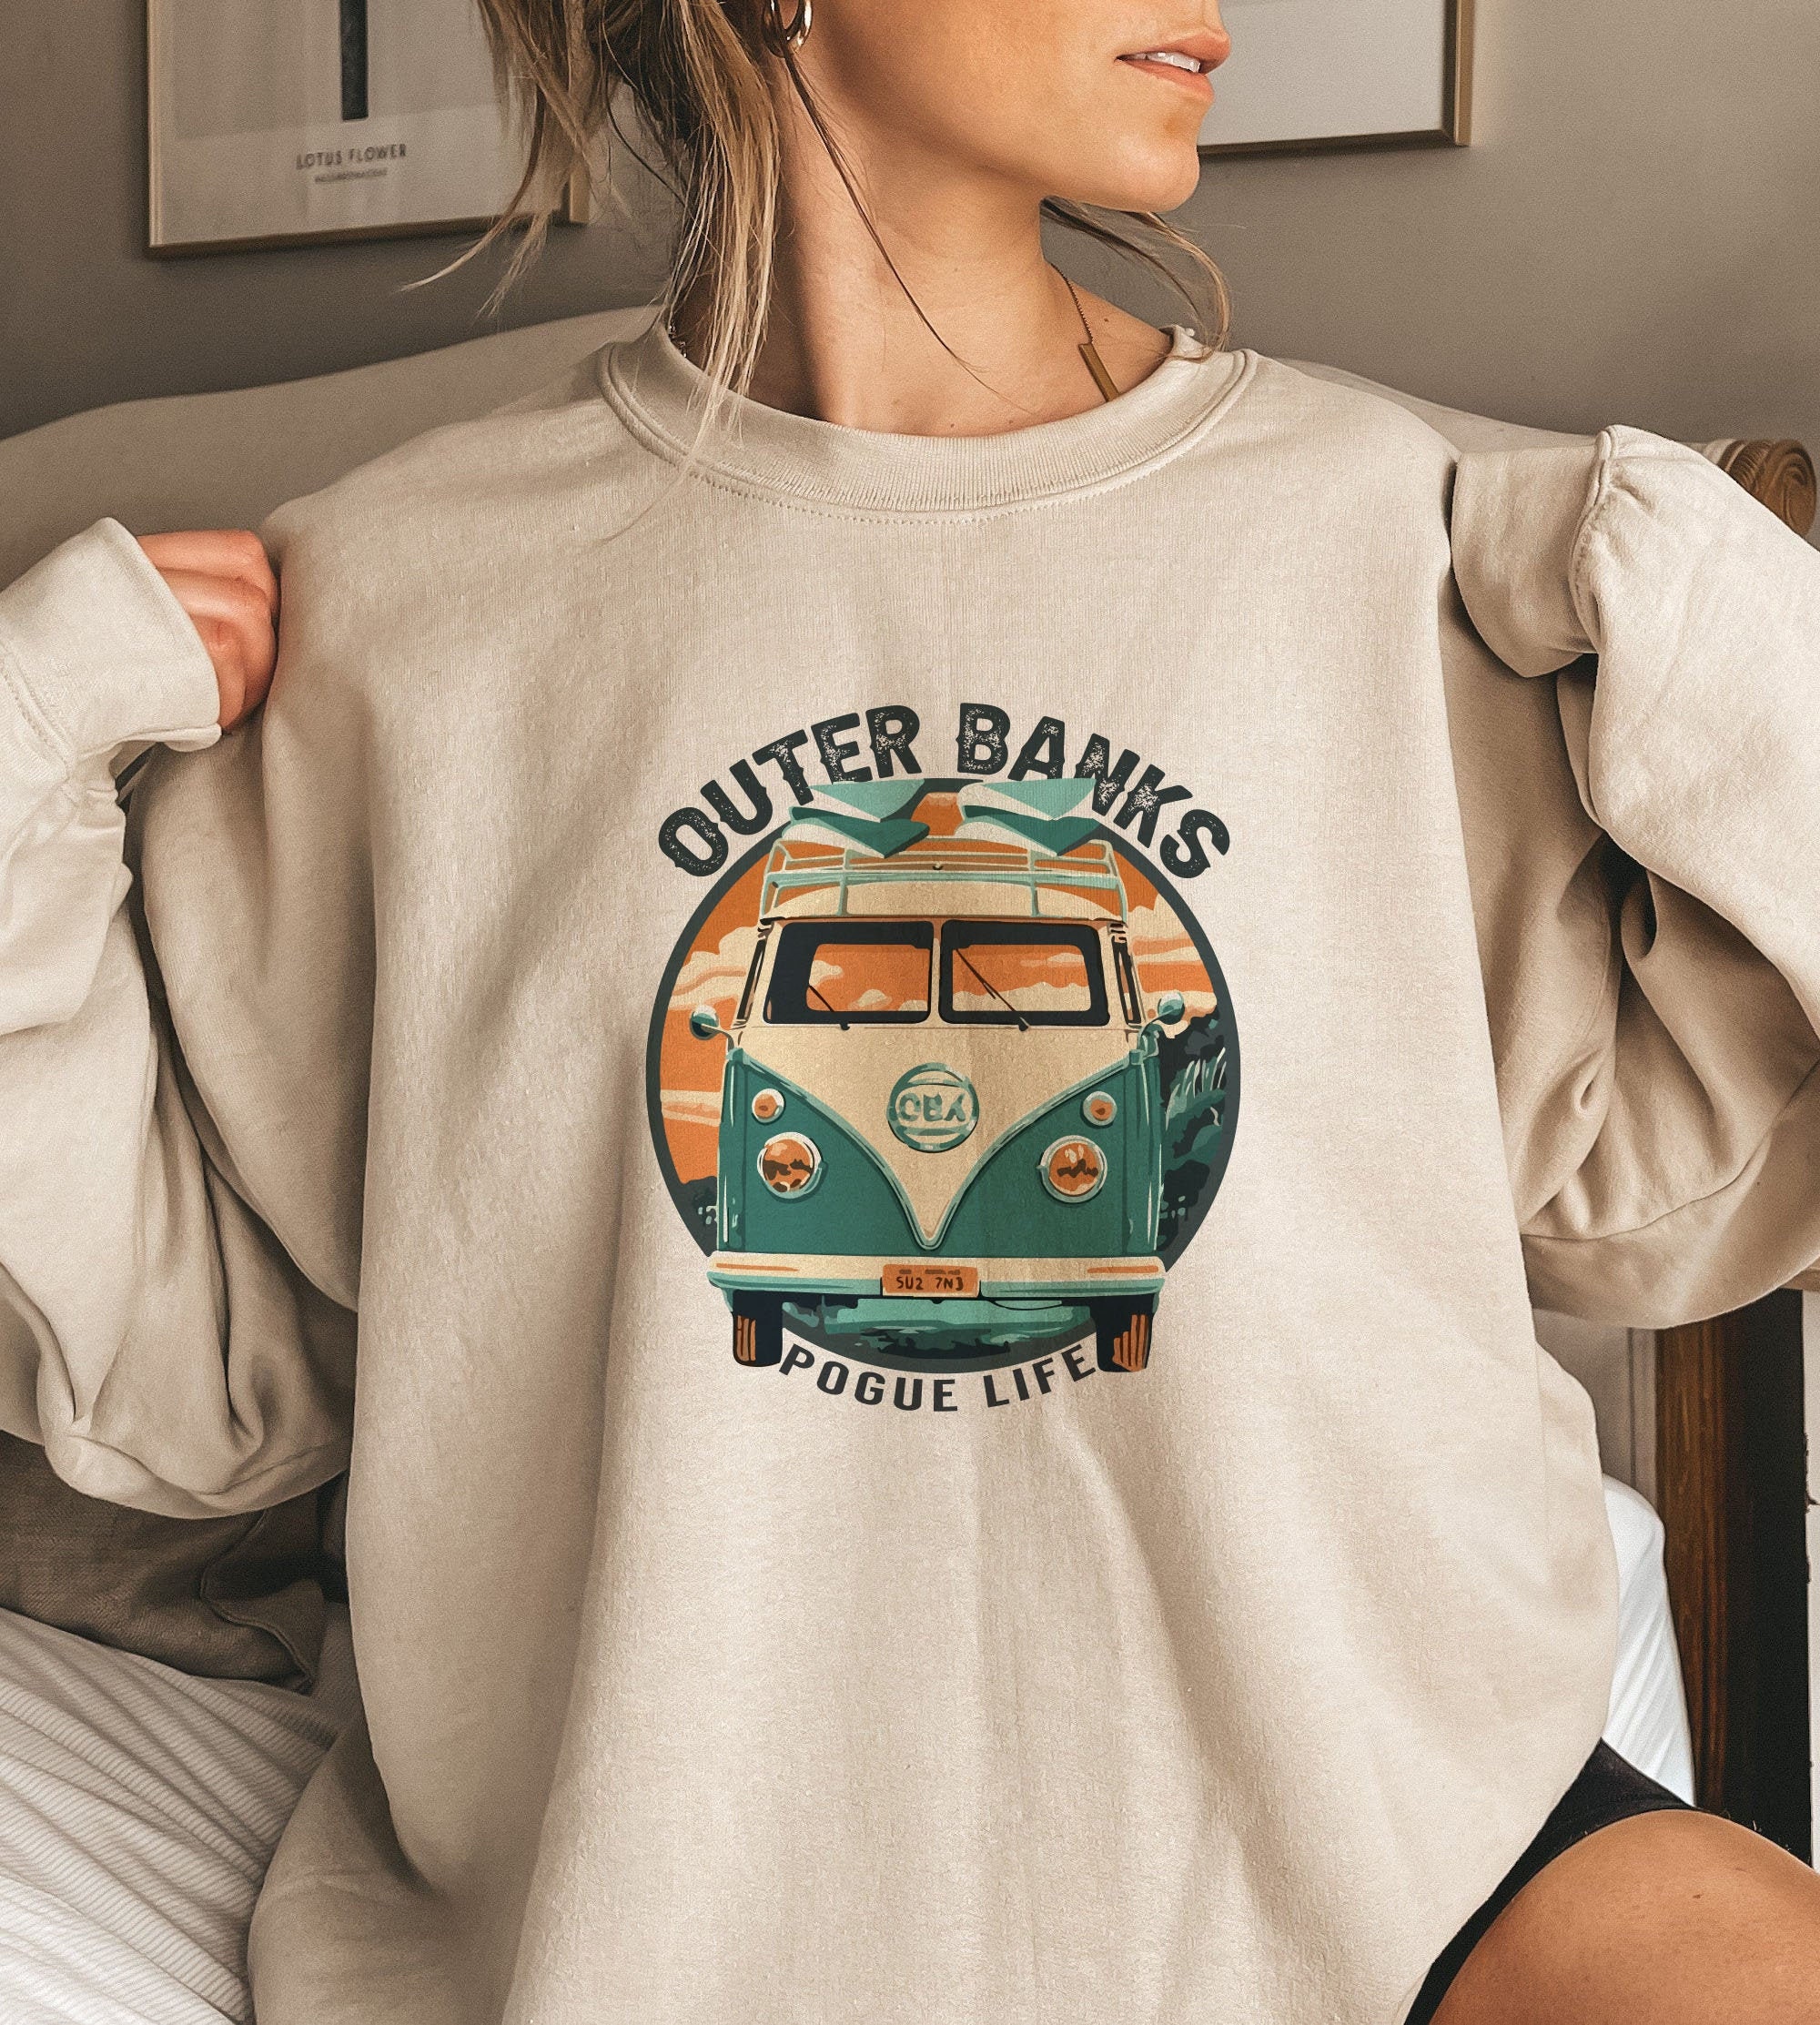 Pogue Life Outer banks Womens Sweatshirt Outer banks Shirt Outer Banks Sweatshirt Netflix Outer Banks Merch